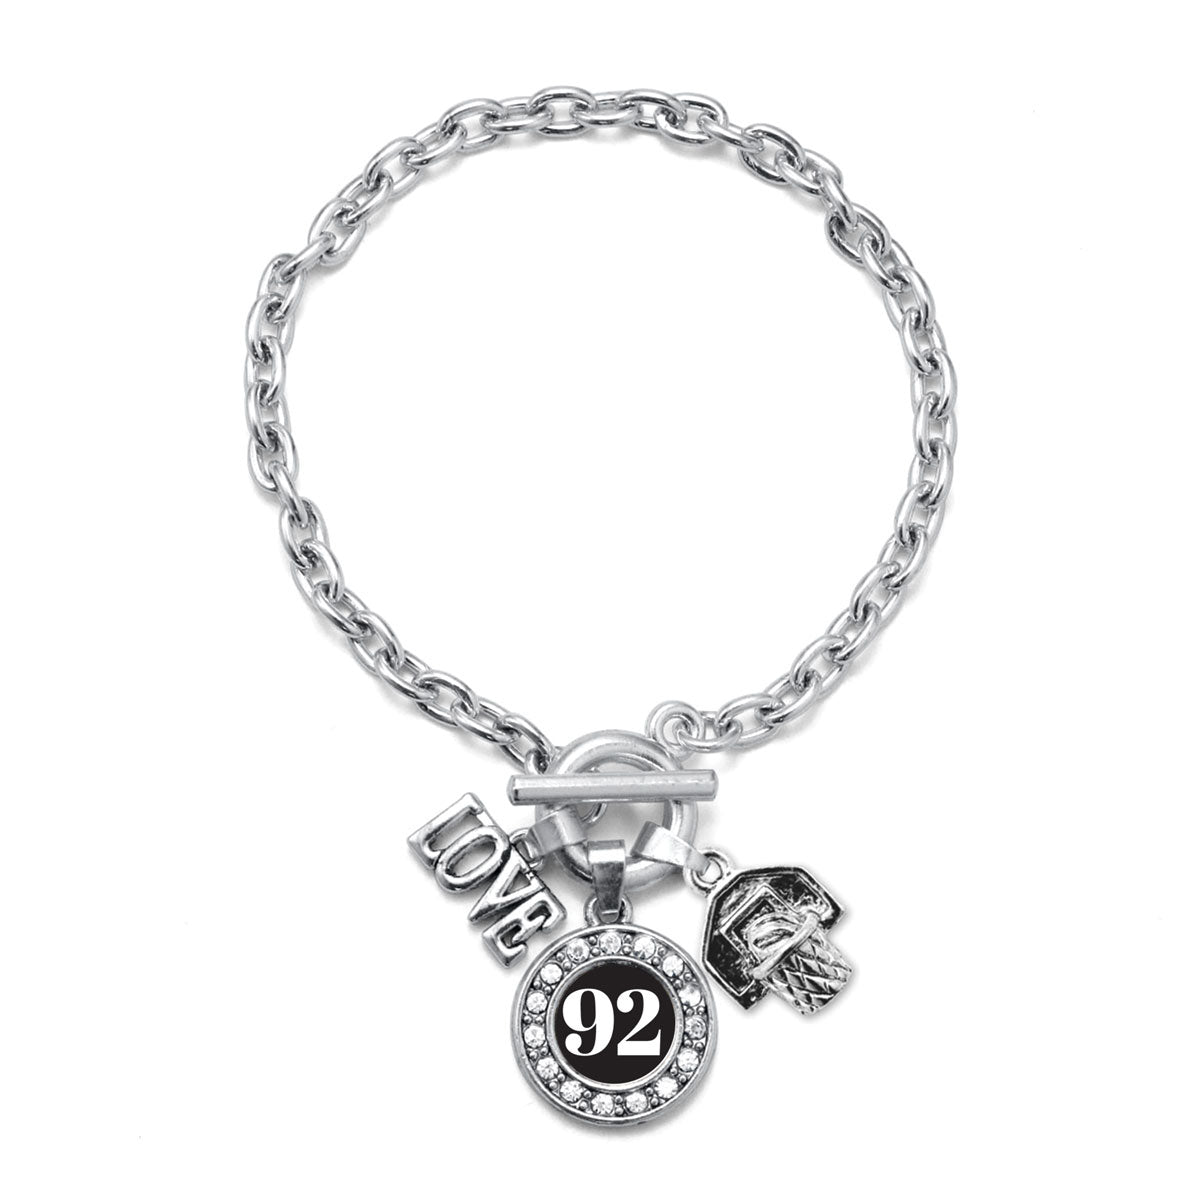 Silver Basketball Hoop - Sports Number 92 Circle Charm Toggle Bracelet